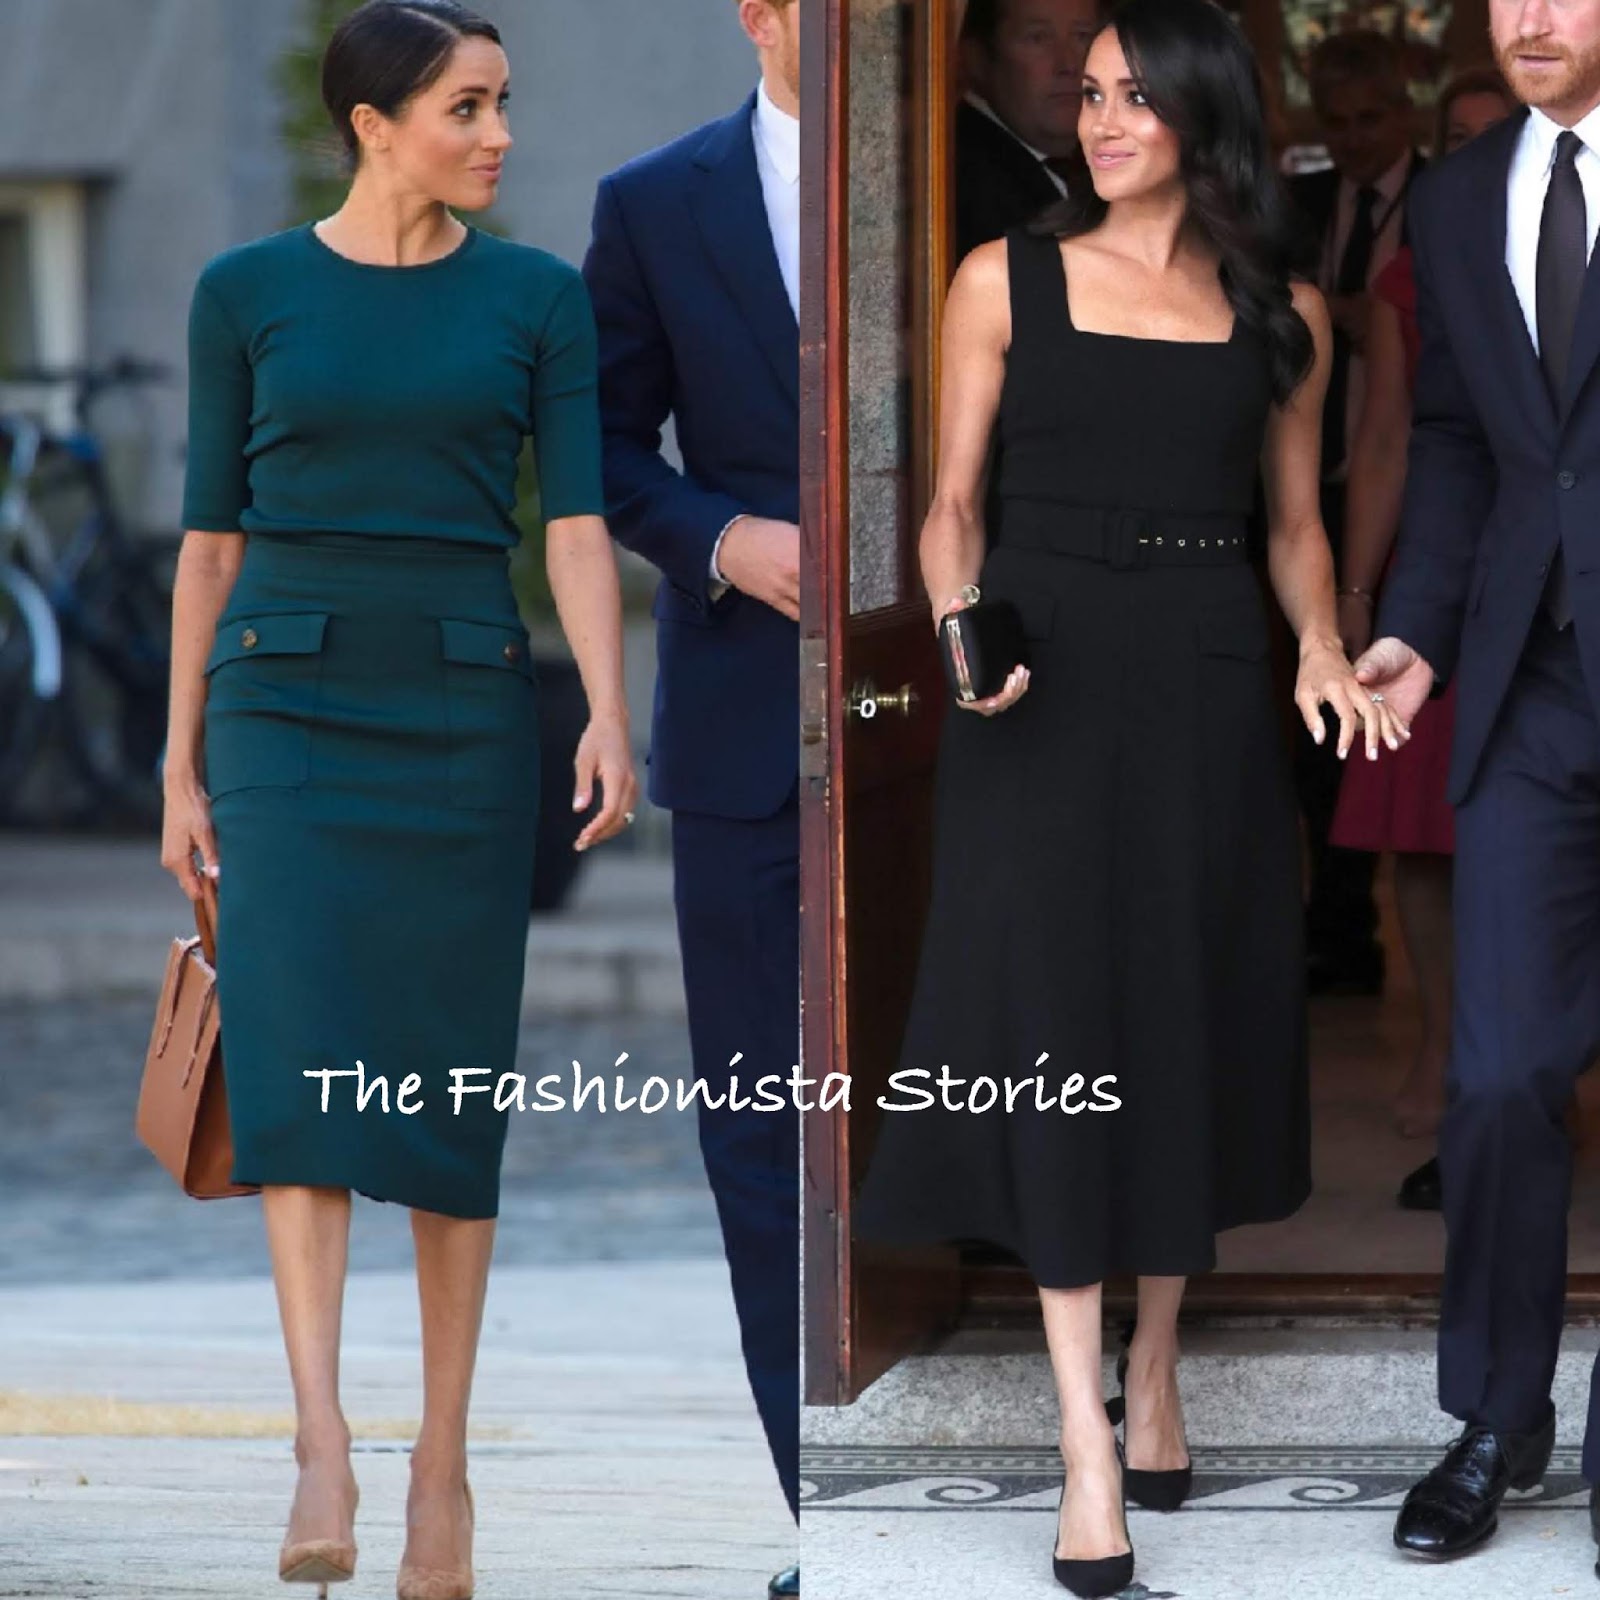 Meghan Duchess of Sussex in Givenchy & Emilia Wickstead in Dublin